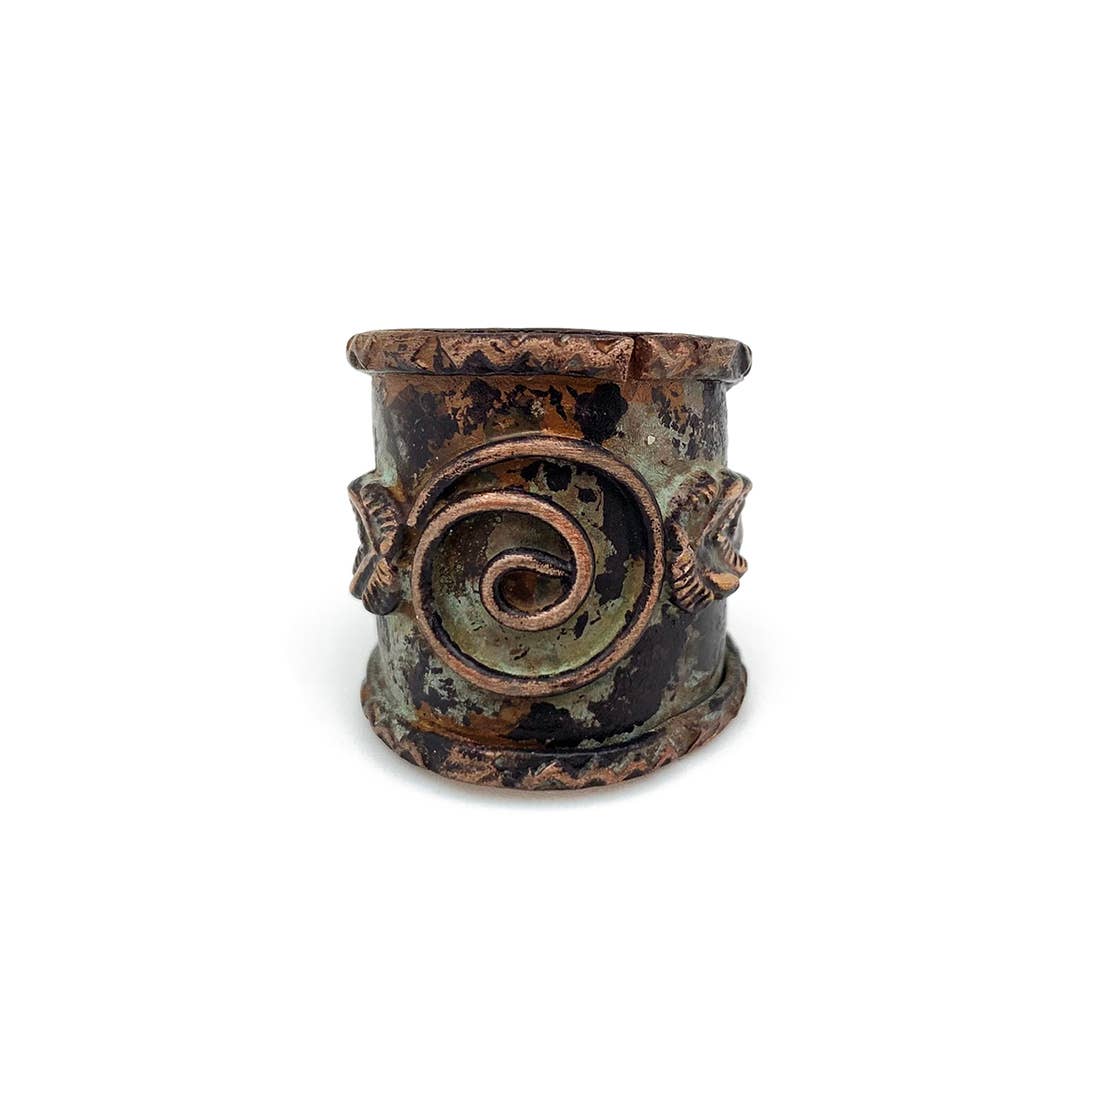 Copper Patina Ring | Turquoise Center Spiral and Leaves - Spiral Circle